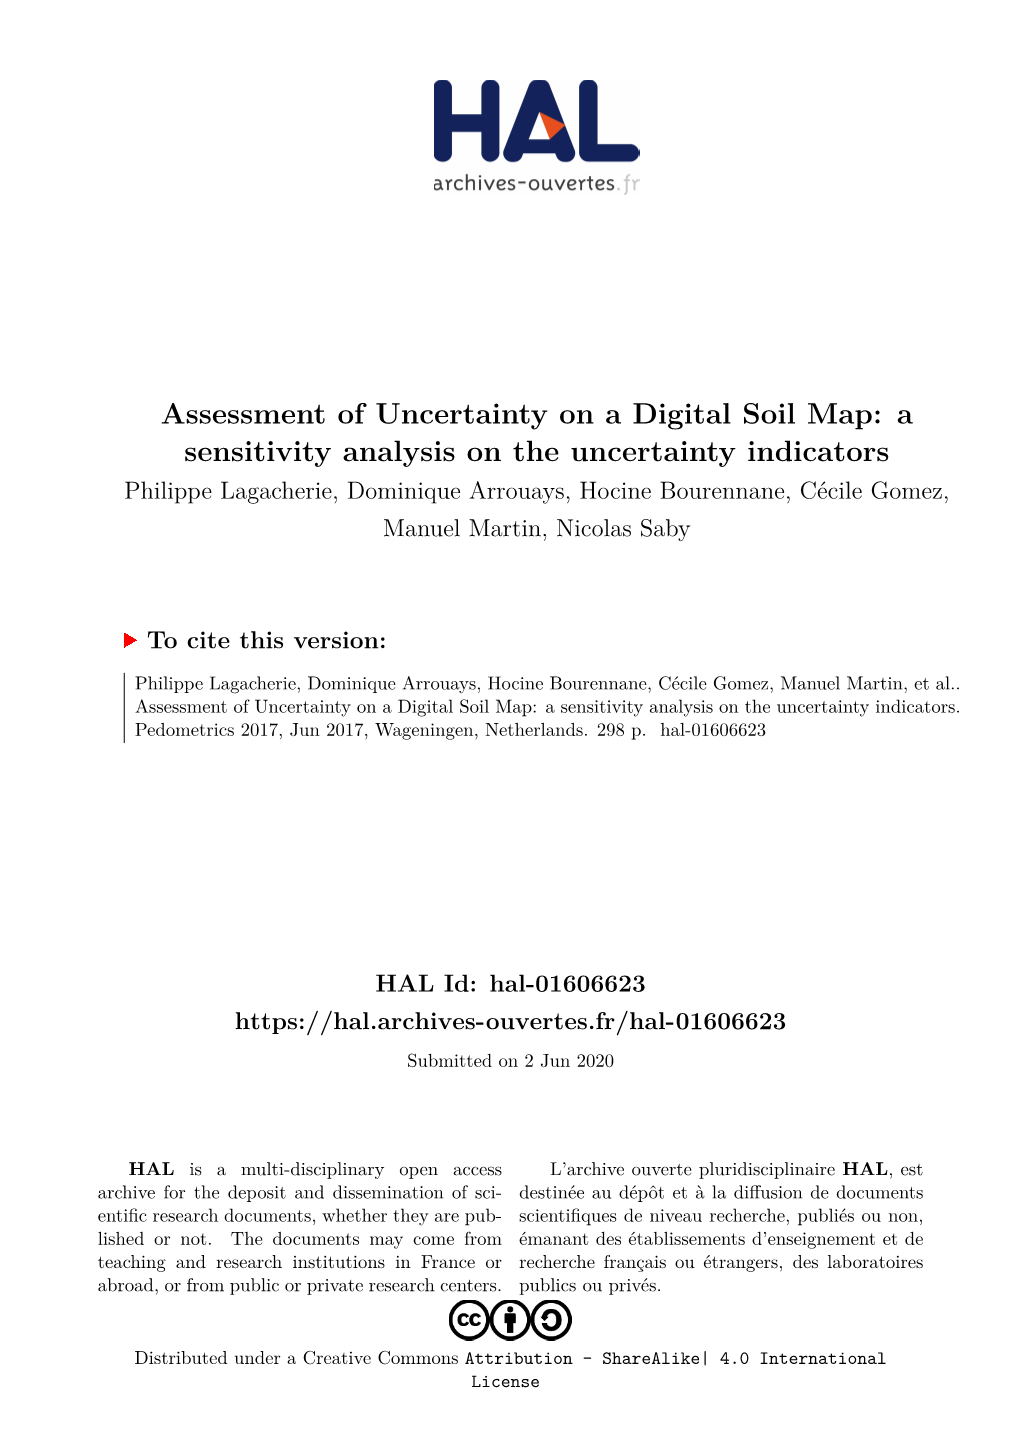 Assessment of Uncertainty on a Digital Soil